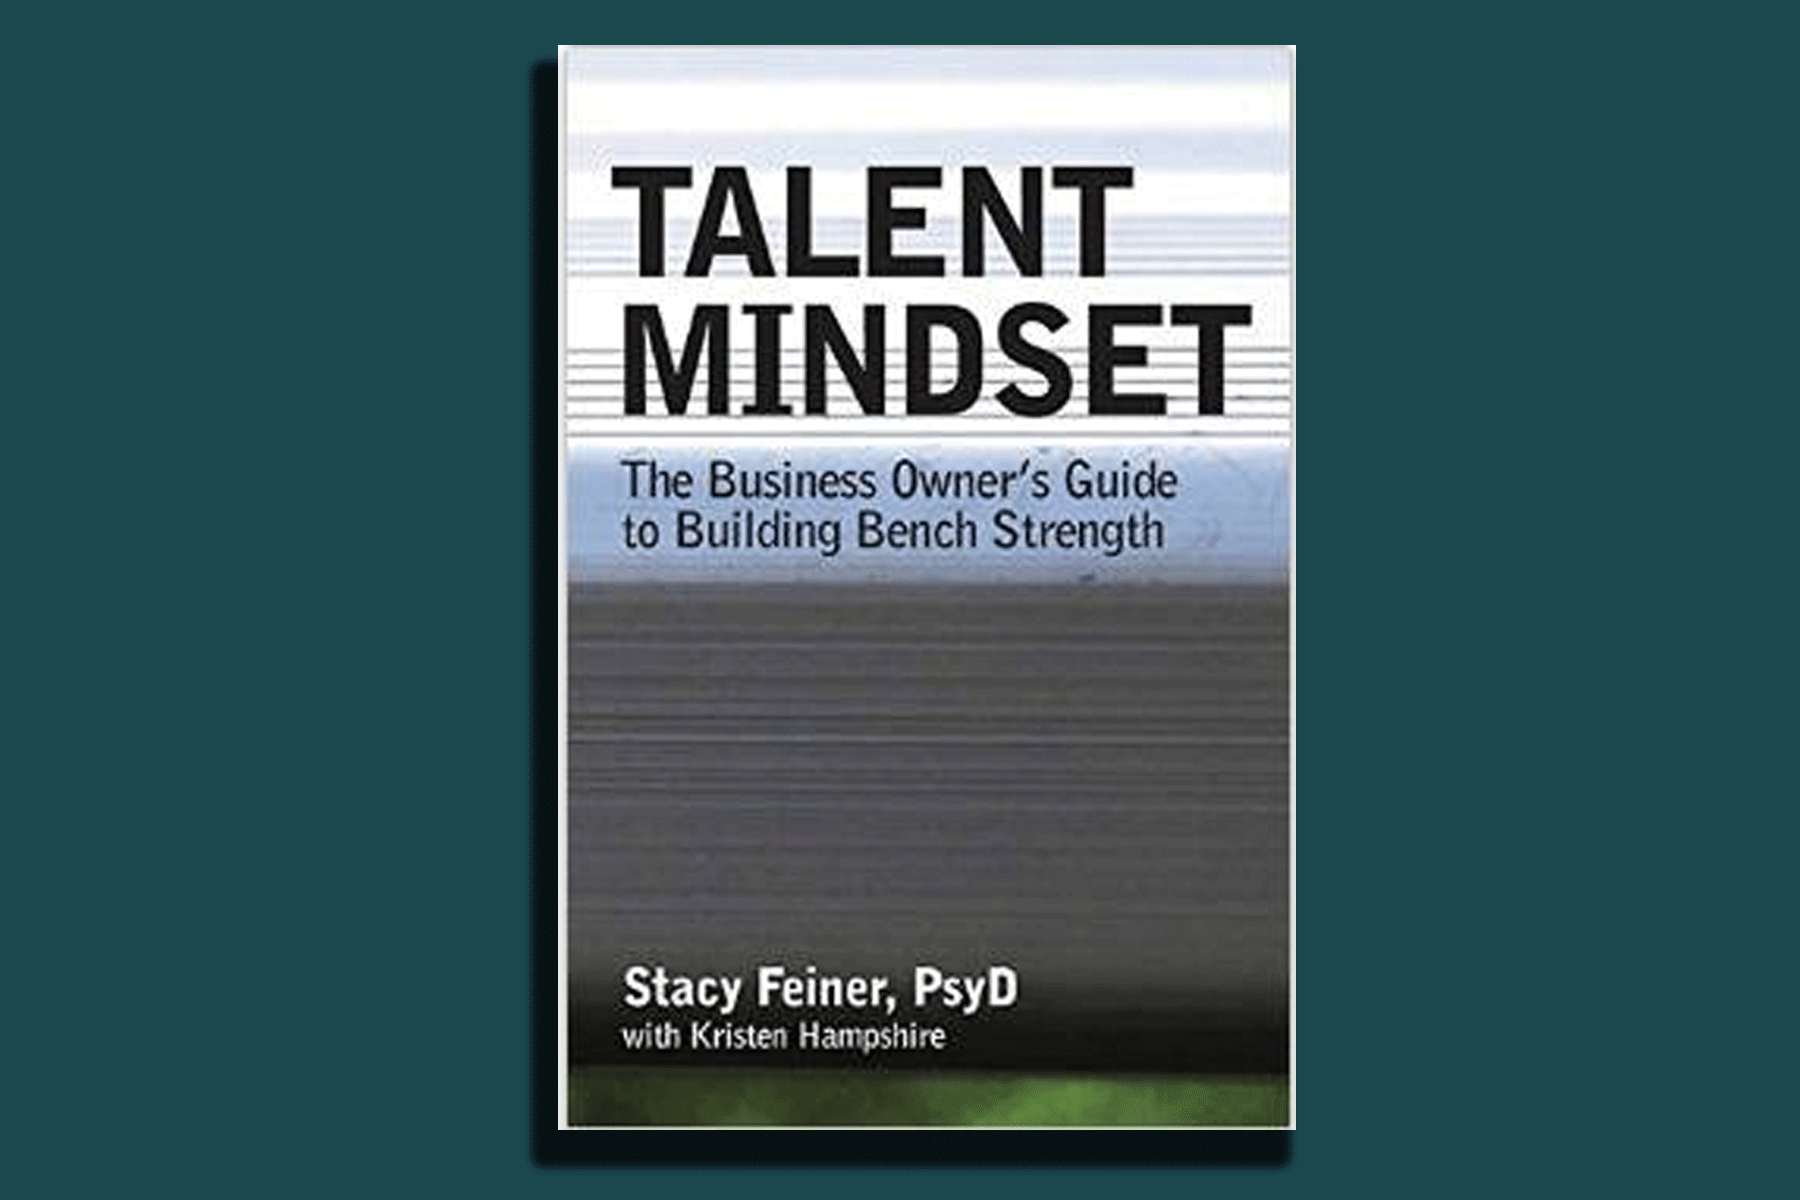 Talent Mindset: The Business Owner’s Guide to Building Bench Strength